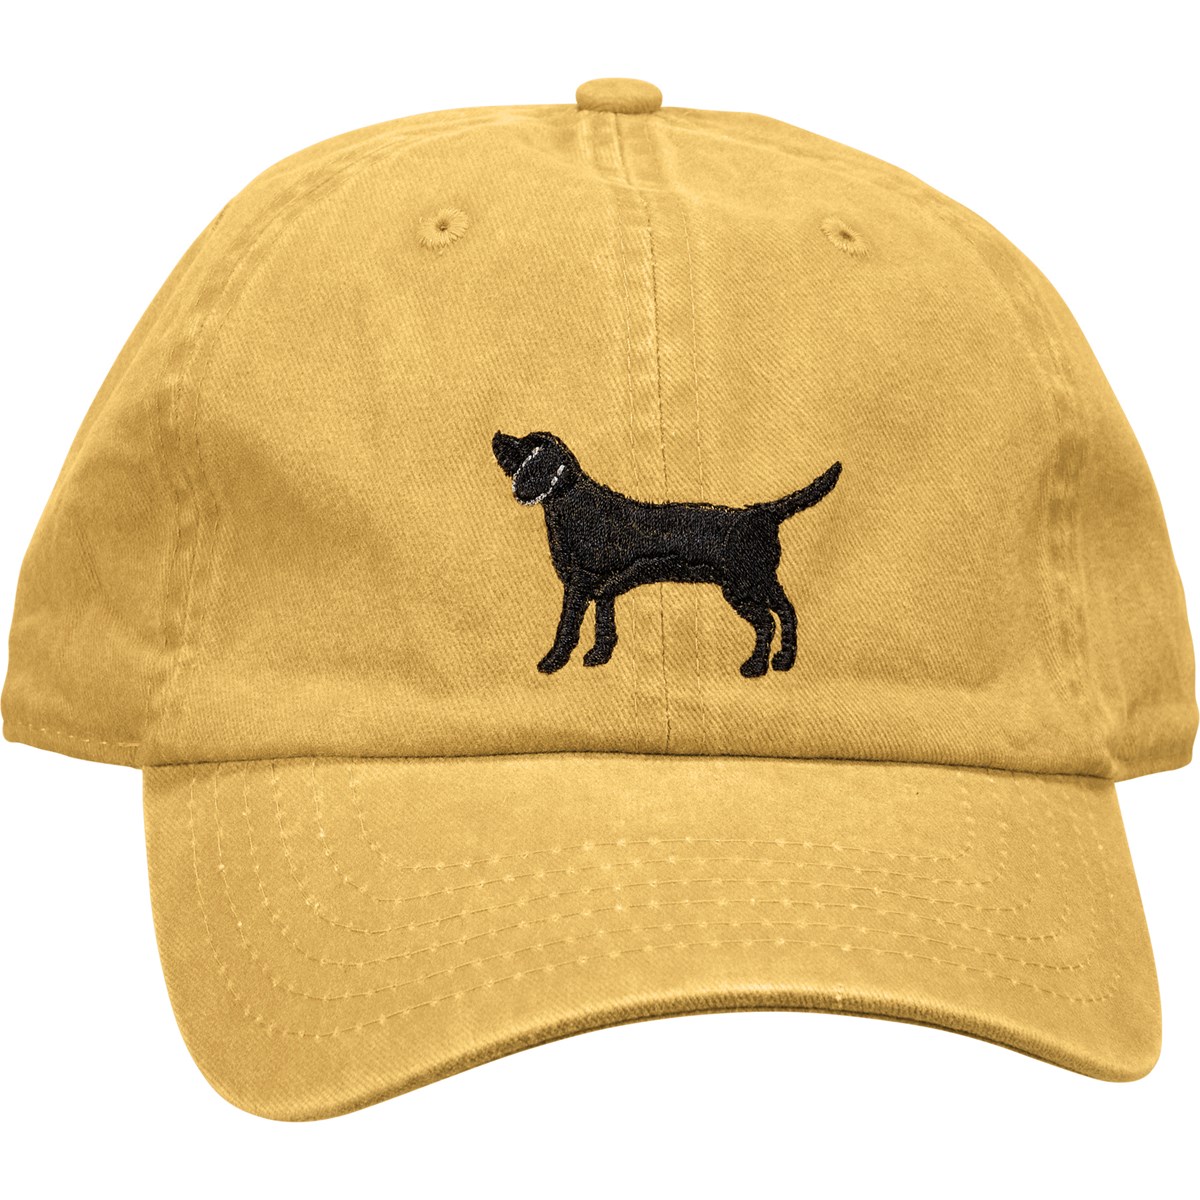 Baseball Cap - Love My Beagle - One Size Fits Most - Cotton, Metal